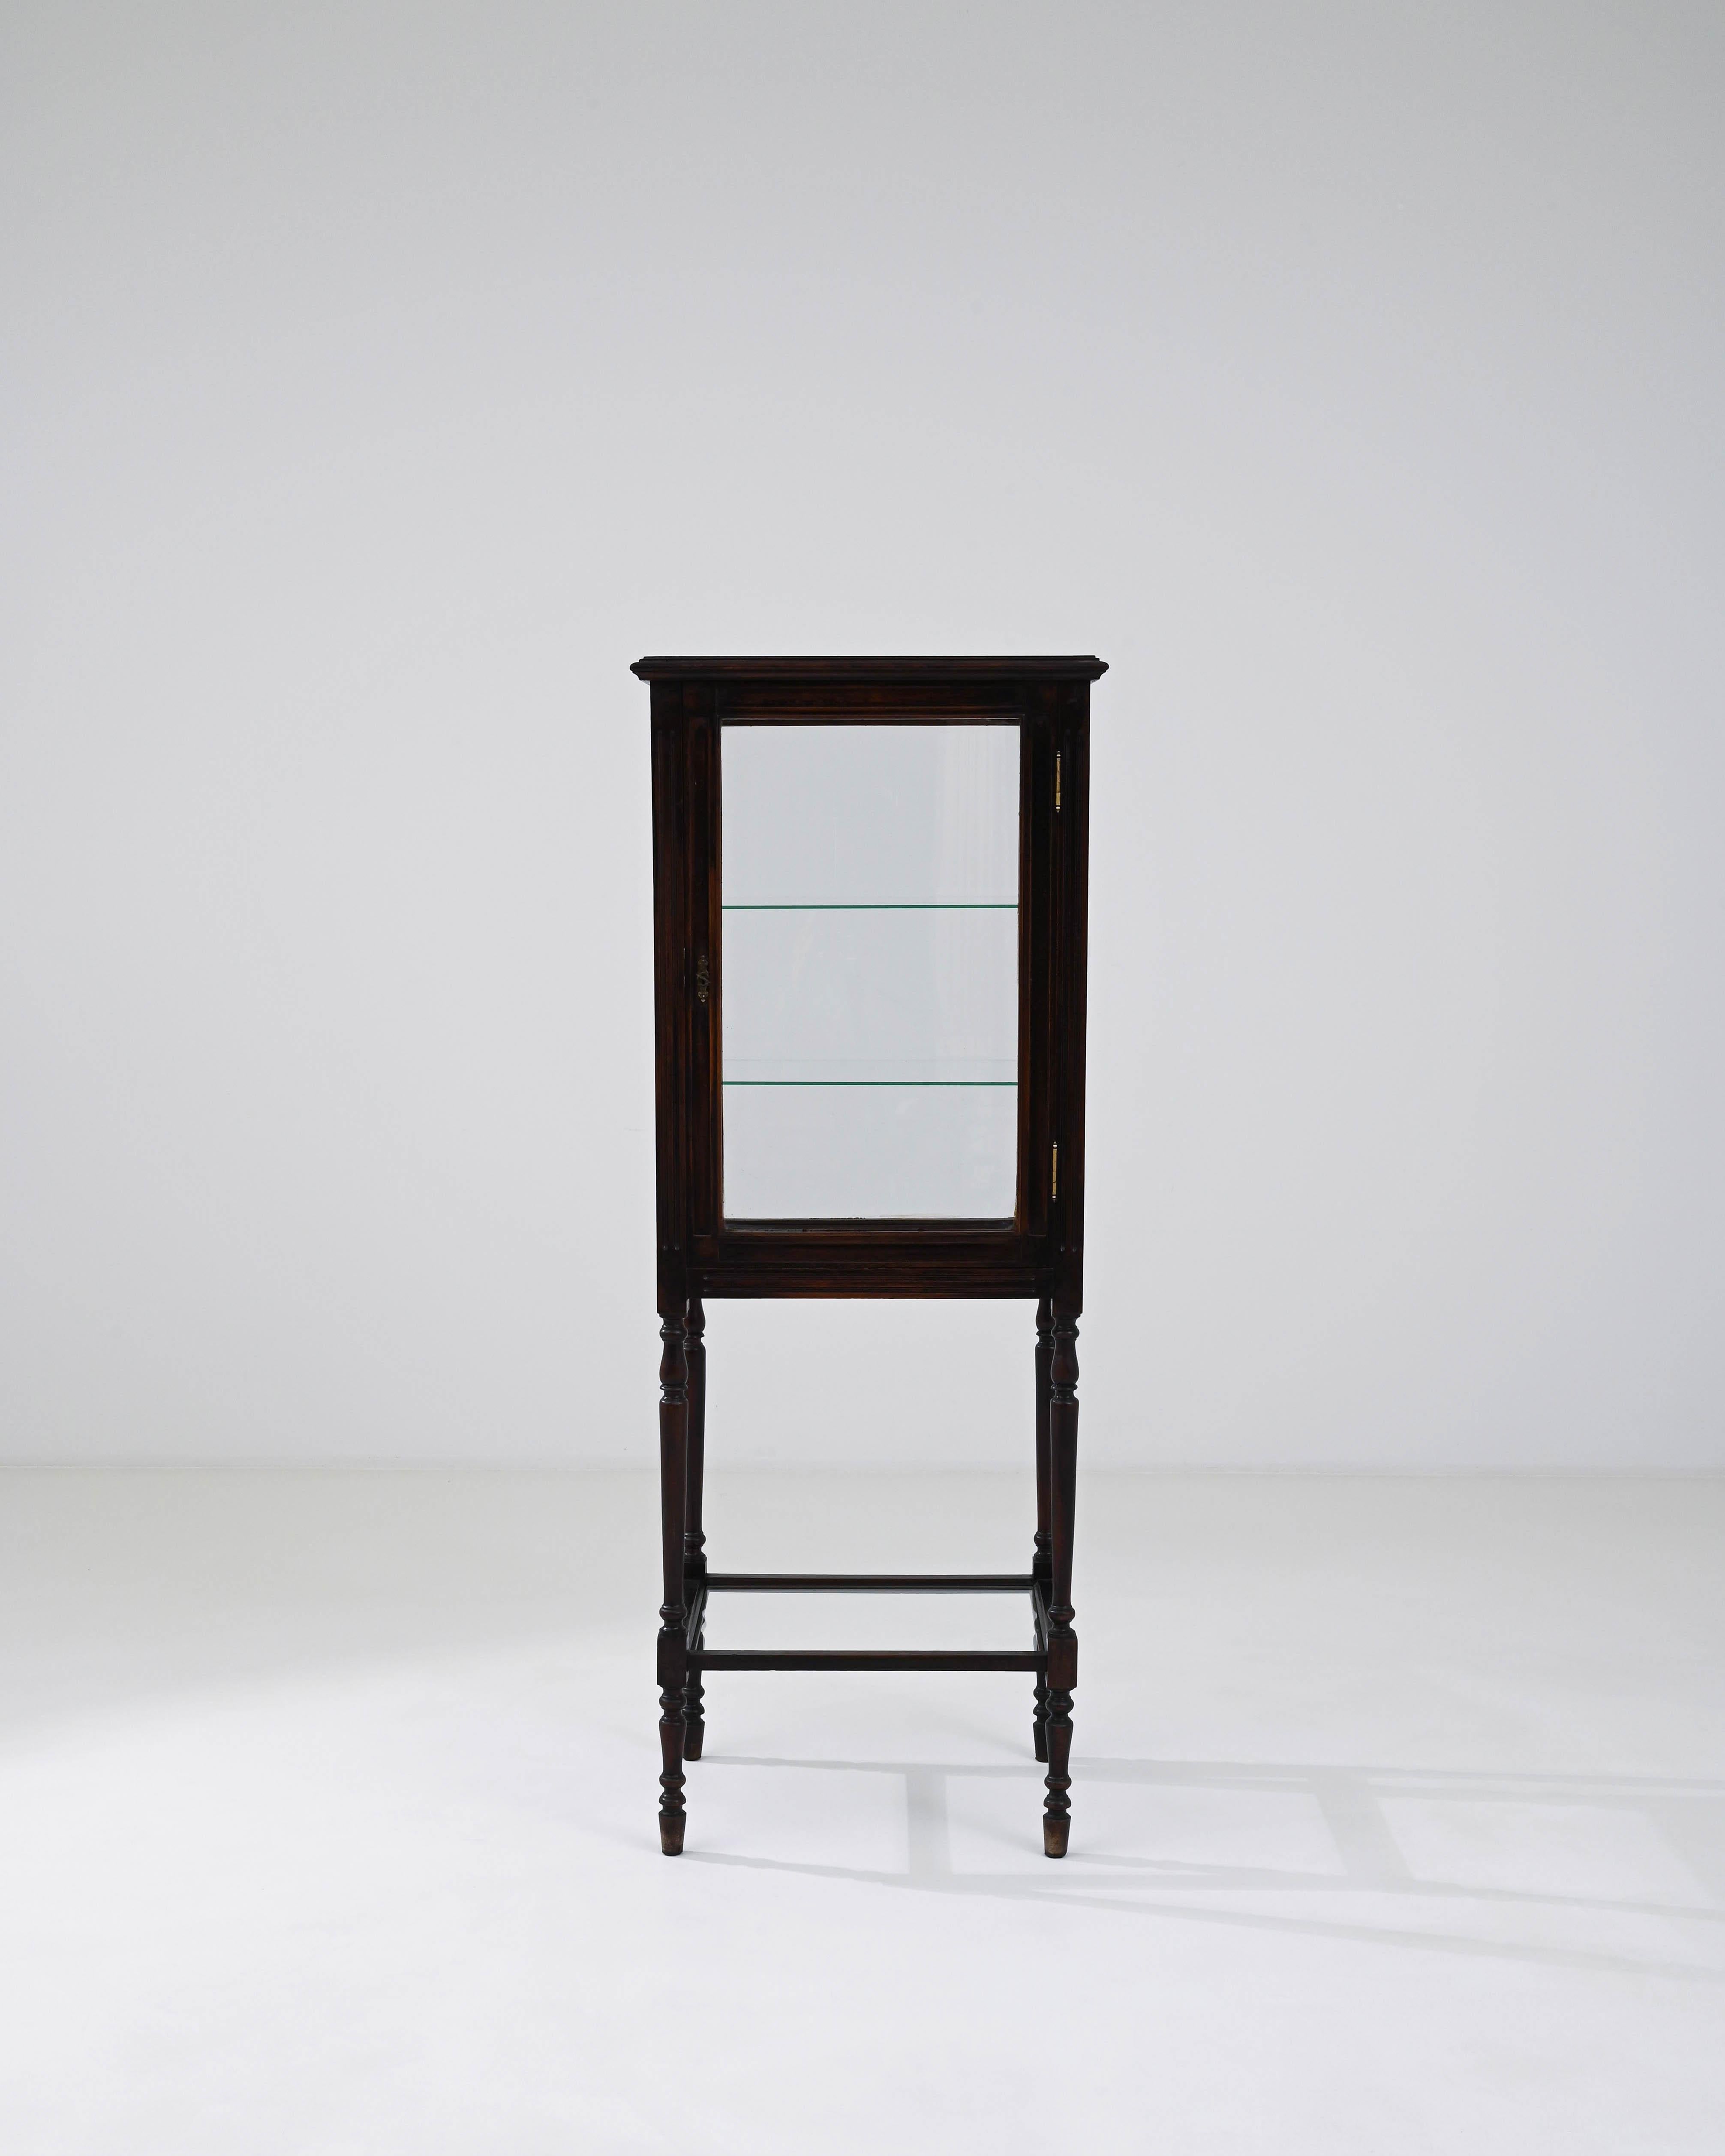 Step into the past with this exquisite Early 20th Century French Wooden Vitrine, a piece that exudes both charm and history. Standing tall on elegantly turned legs, this vitrine's dark, polished wood boasts the rich, deep hues of its storied life.